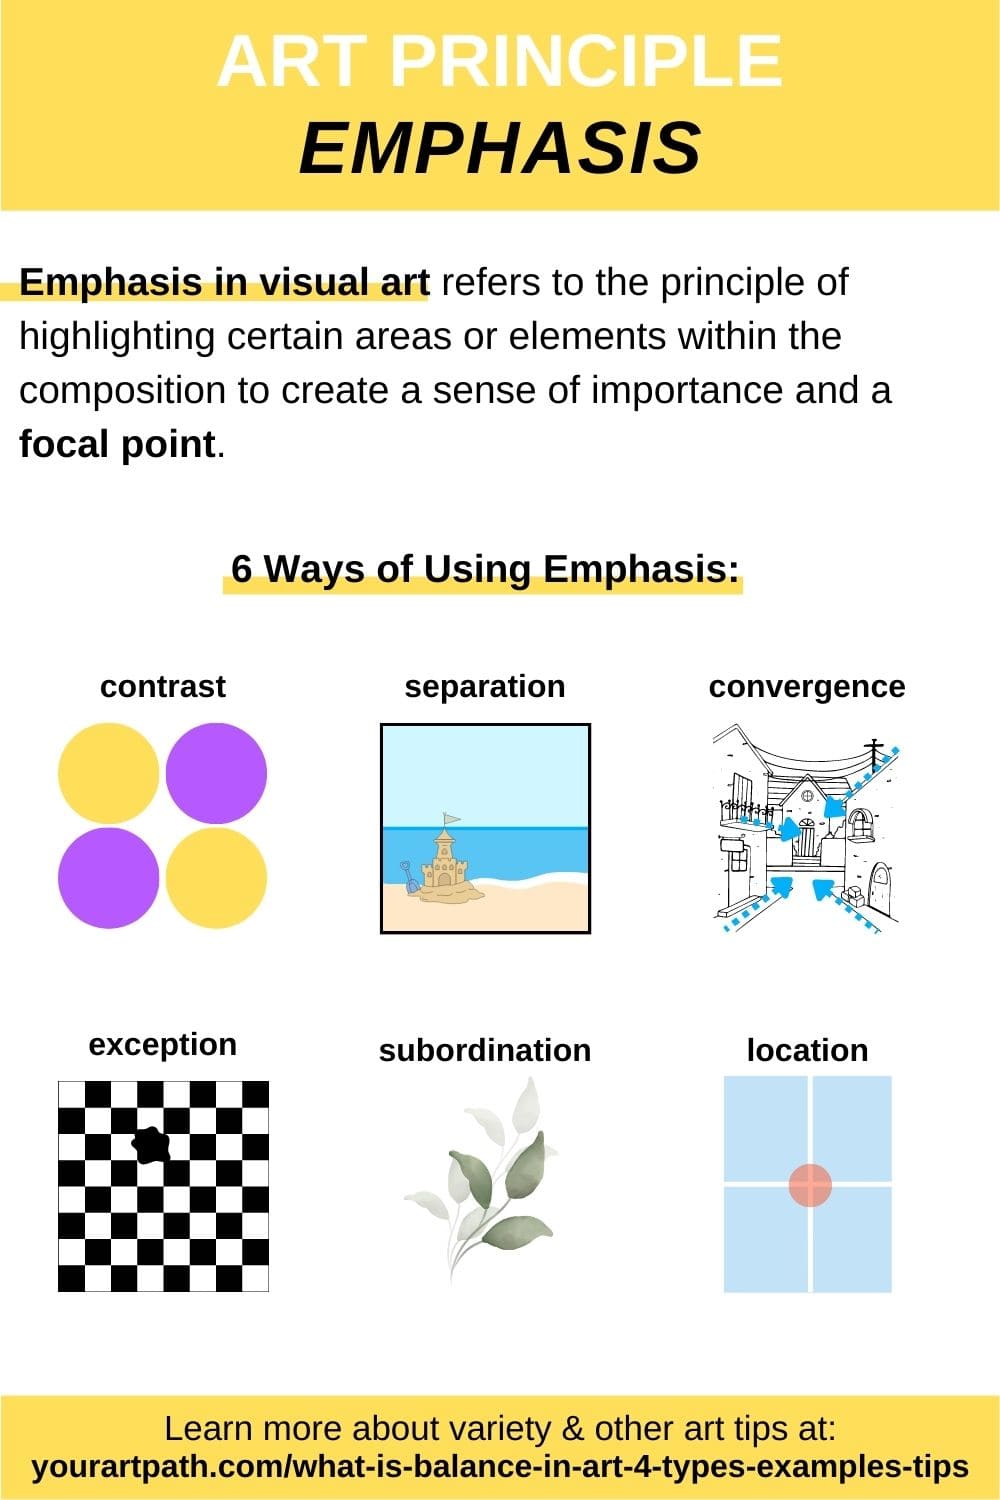 Emphasis in Arts: Definition and Meaning + 6 ways to use it examples